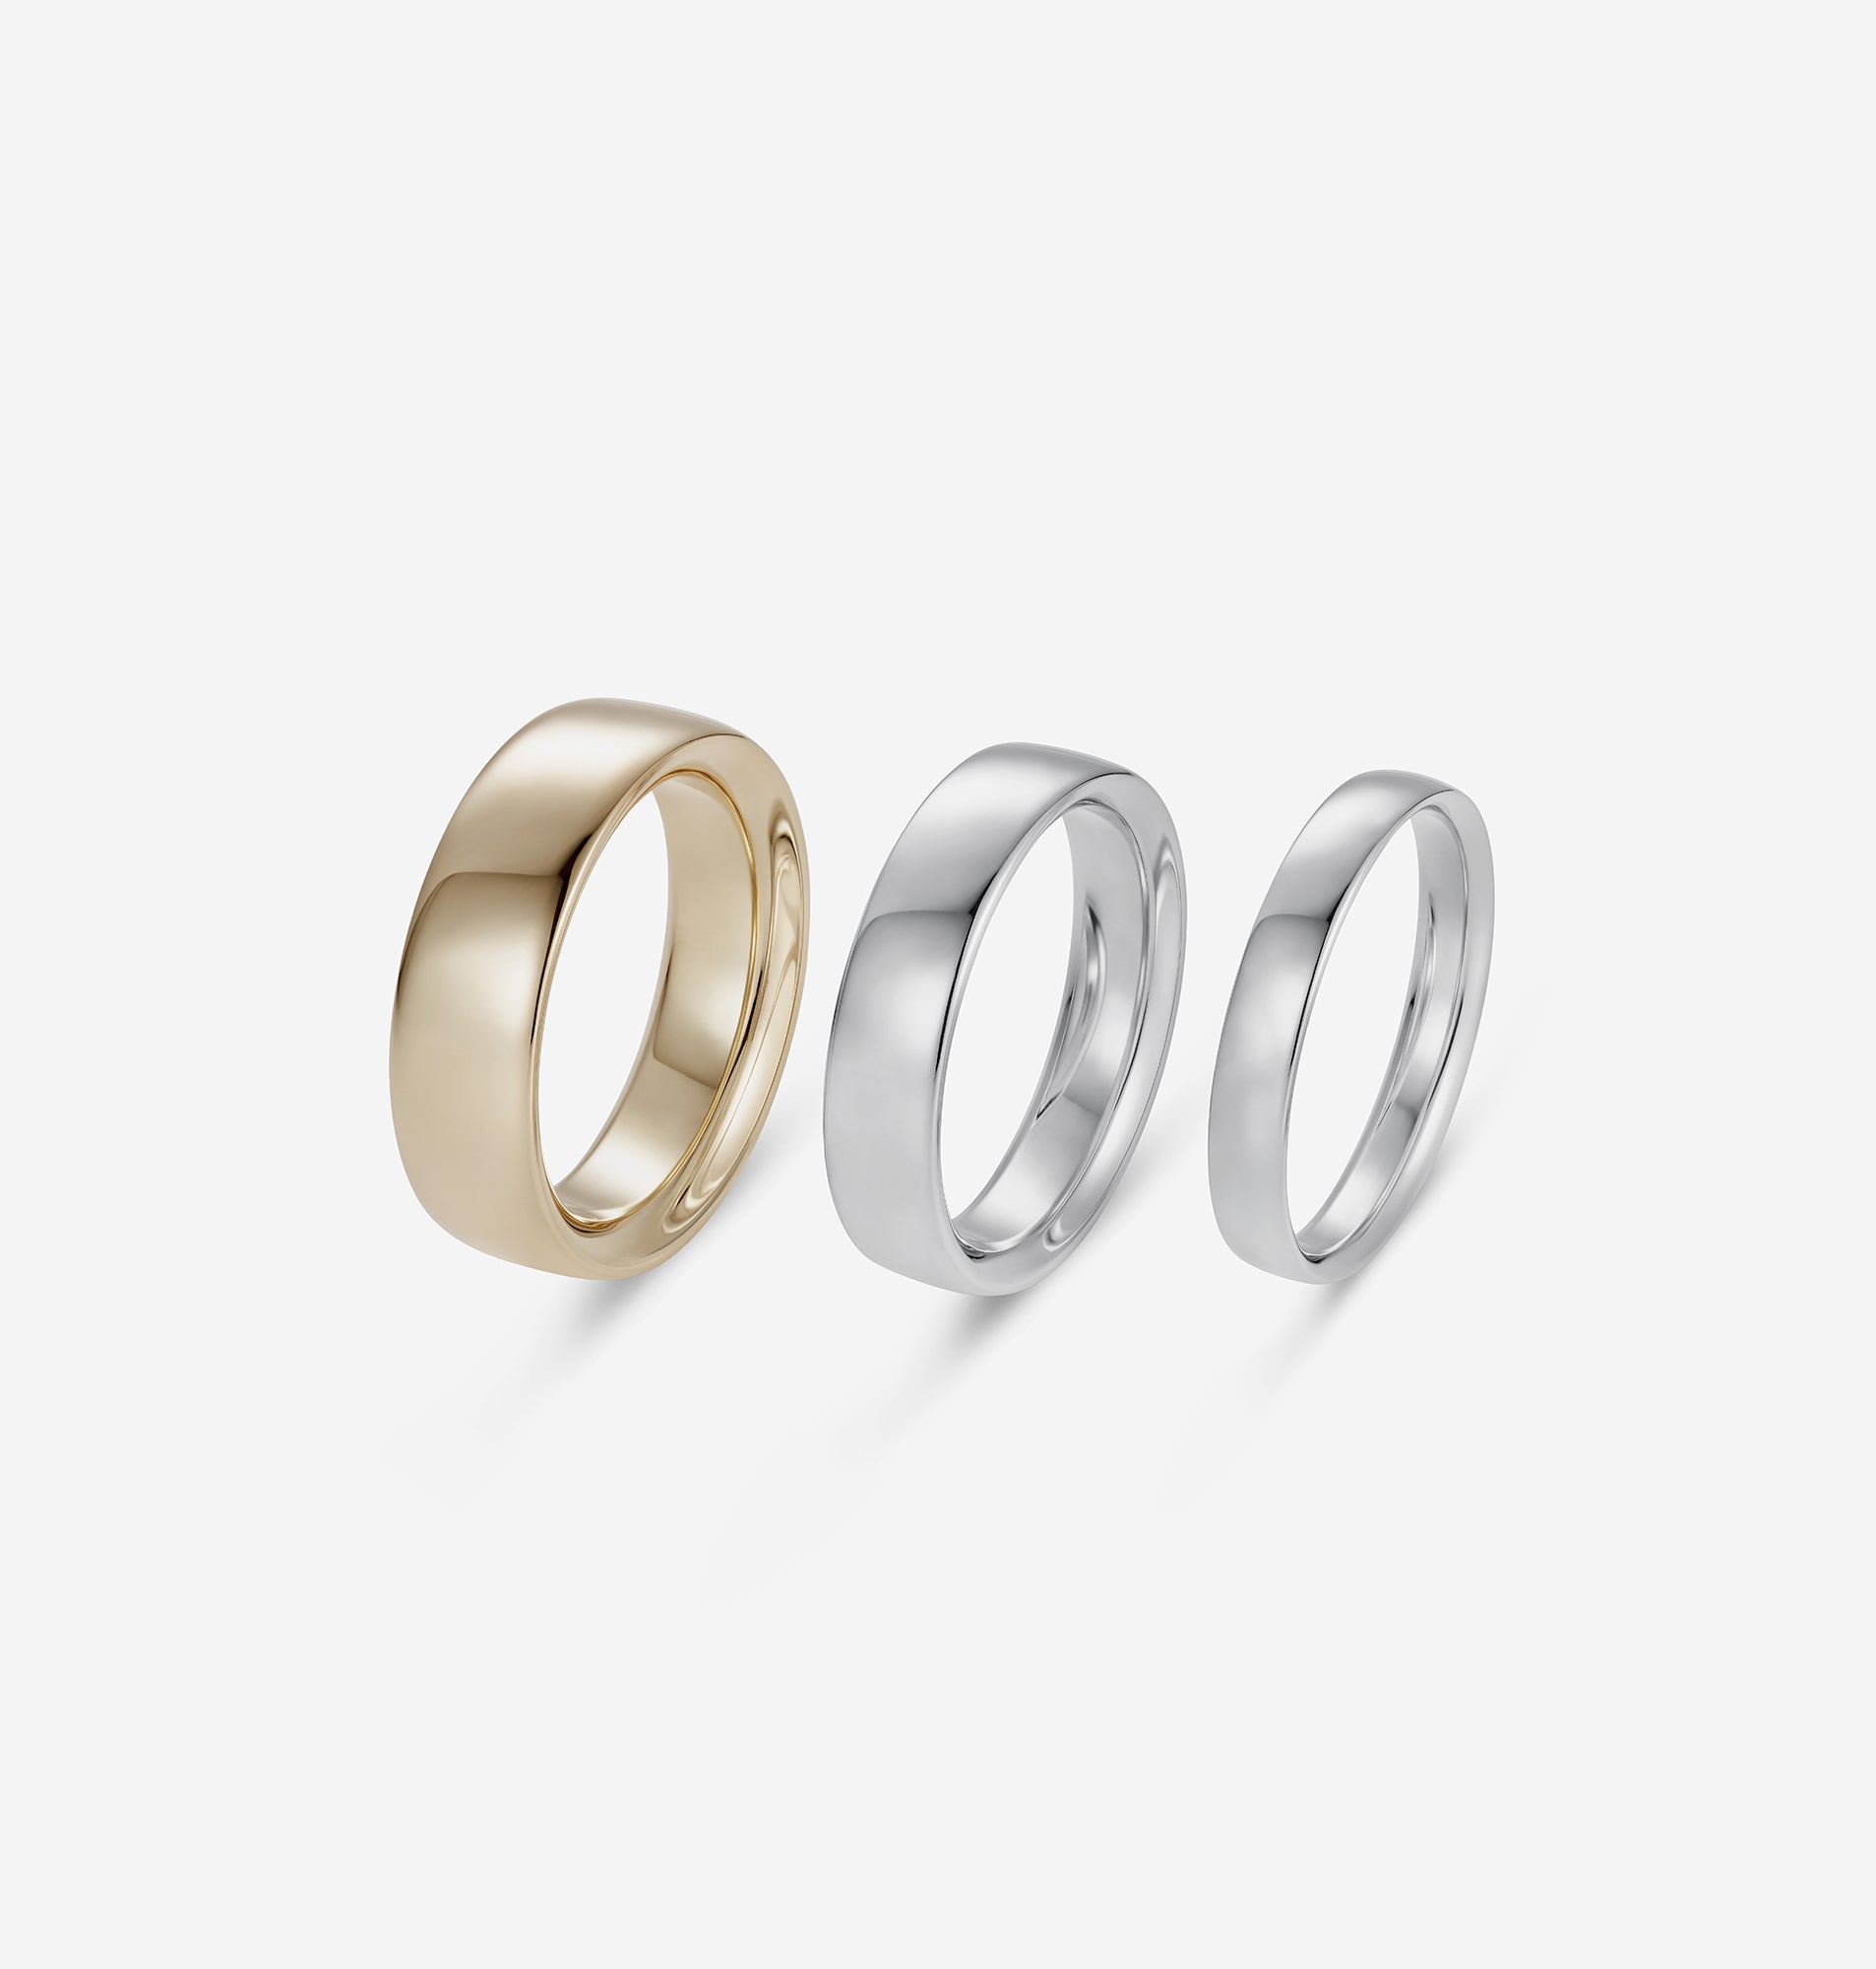 886 Royal Mint Rings 886 Band Ring in 18ct Yellow Gold